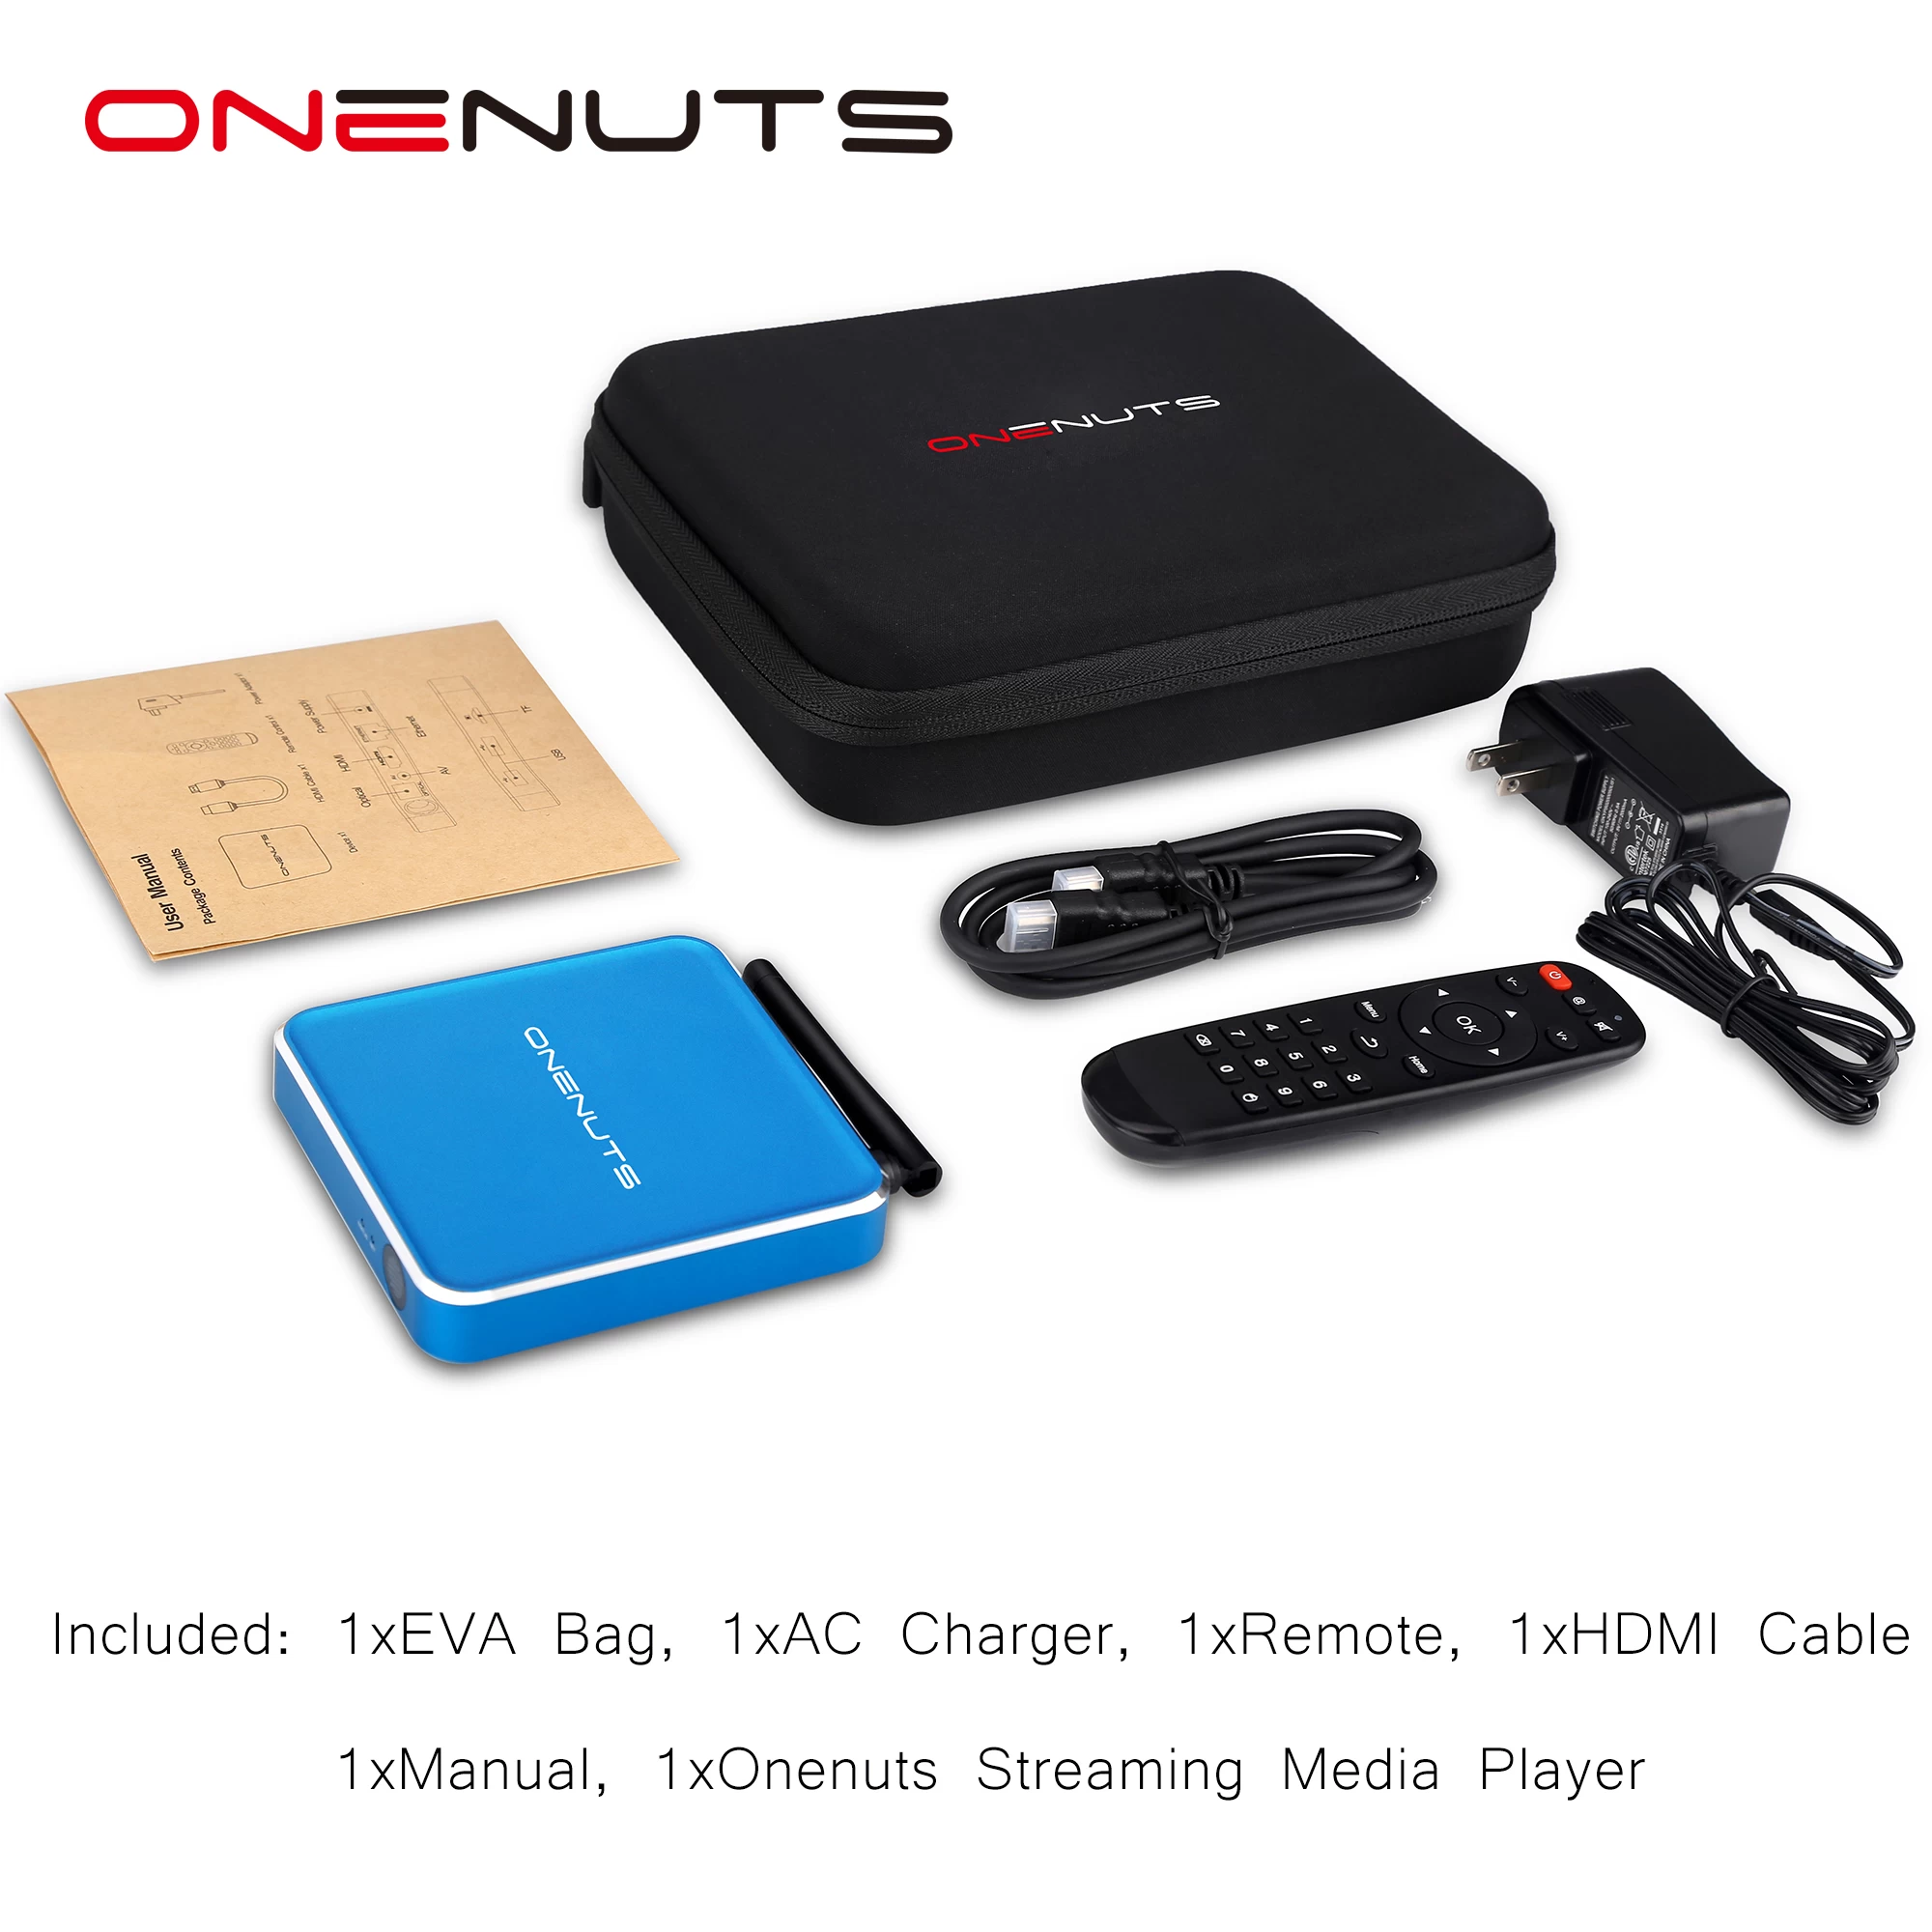 Android IPTV Box-Anbieter Android TV BOX mit integriertem 3G / 4G LTE WCDMA-Funkmodul